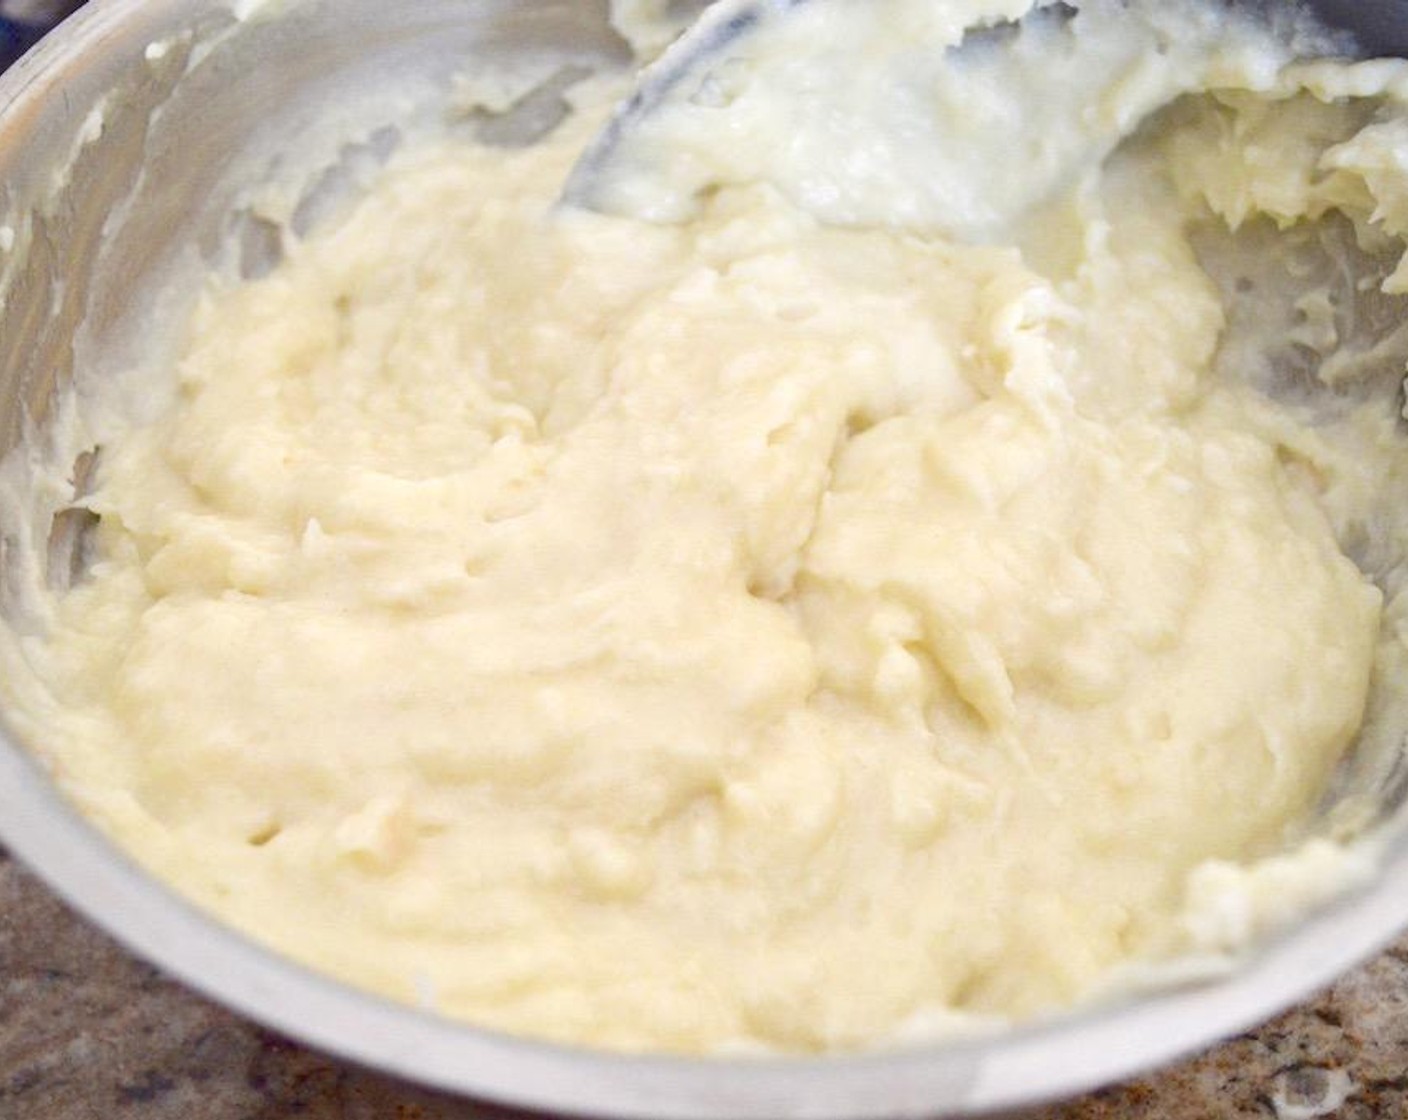 step 5 While they cool, make the coconut cream. Combine the Half and Half (3 cups), Eggs (2), Granulated Sugar (3/4 cup), All-Purpose Flour (1/2 cup), Coconut Extract (1/2 tsp) and Salt (1 pinch) together in a medium sauce pan.